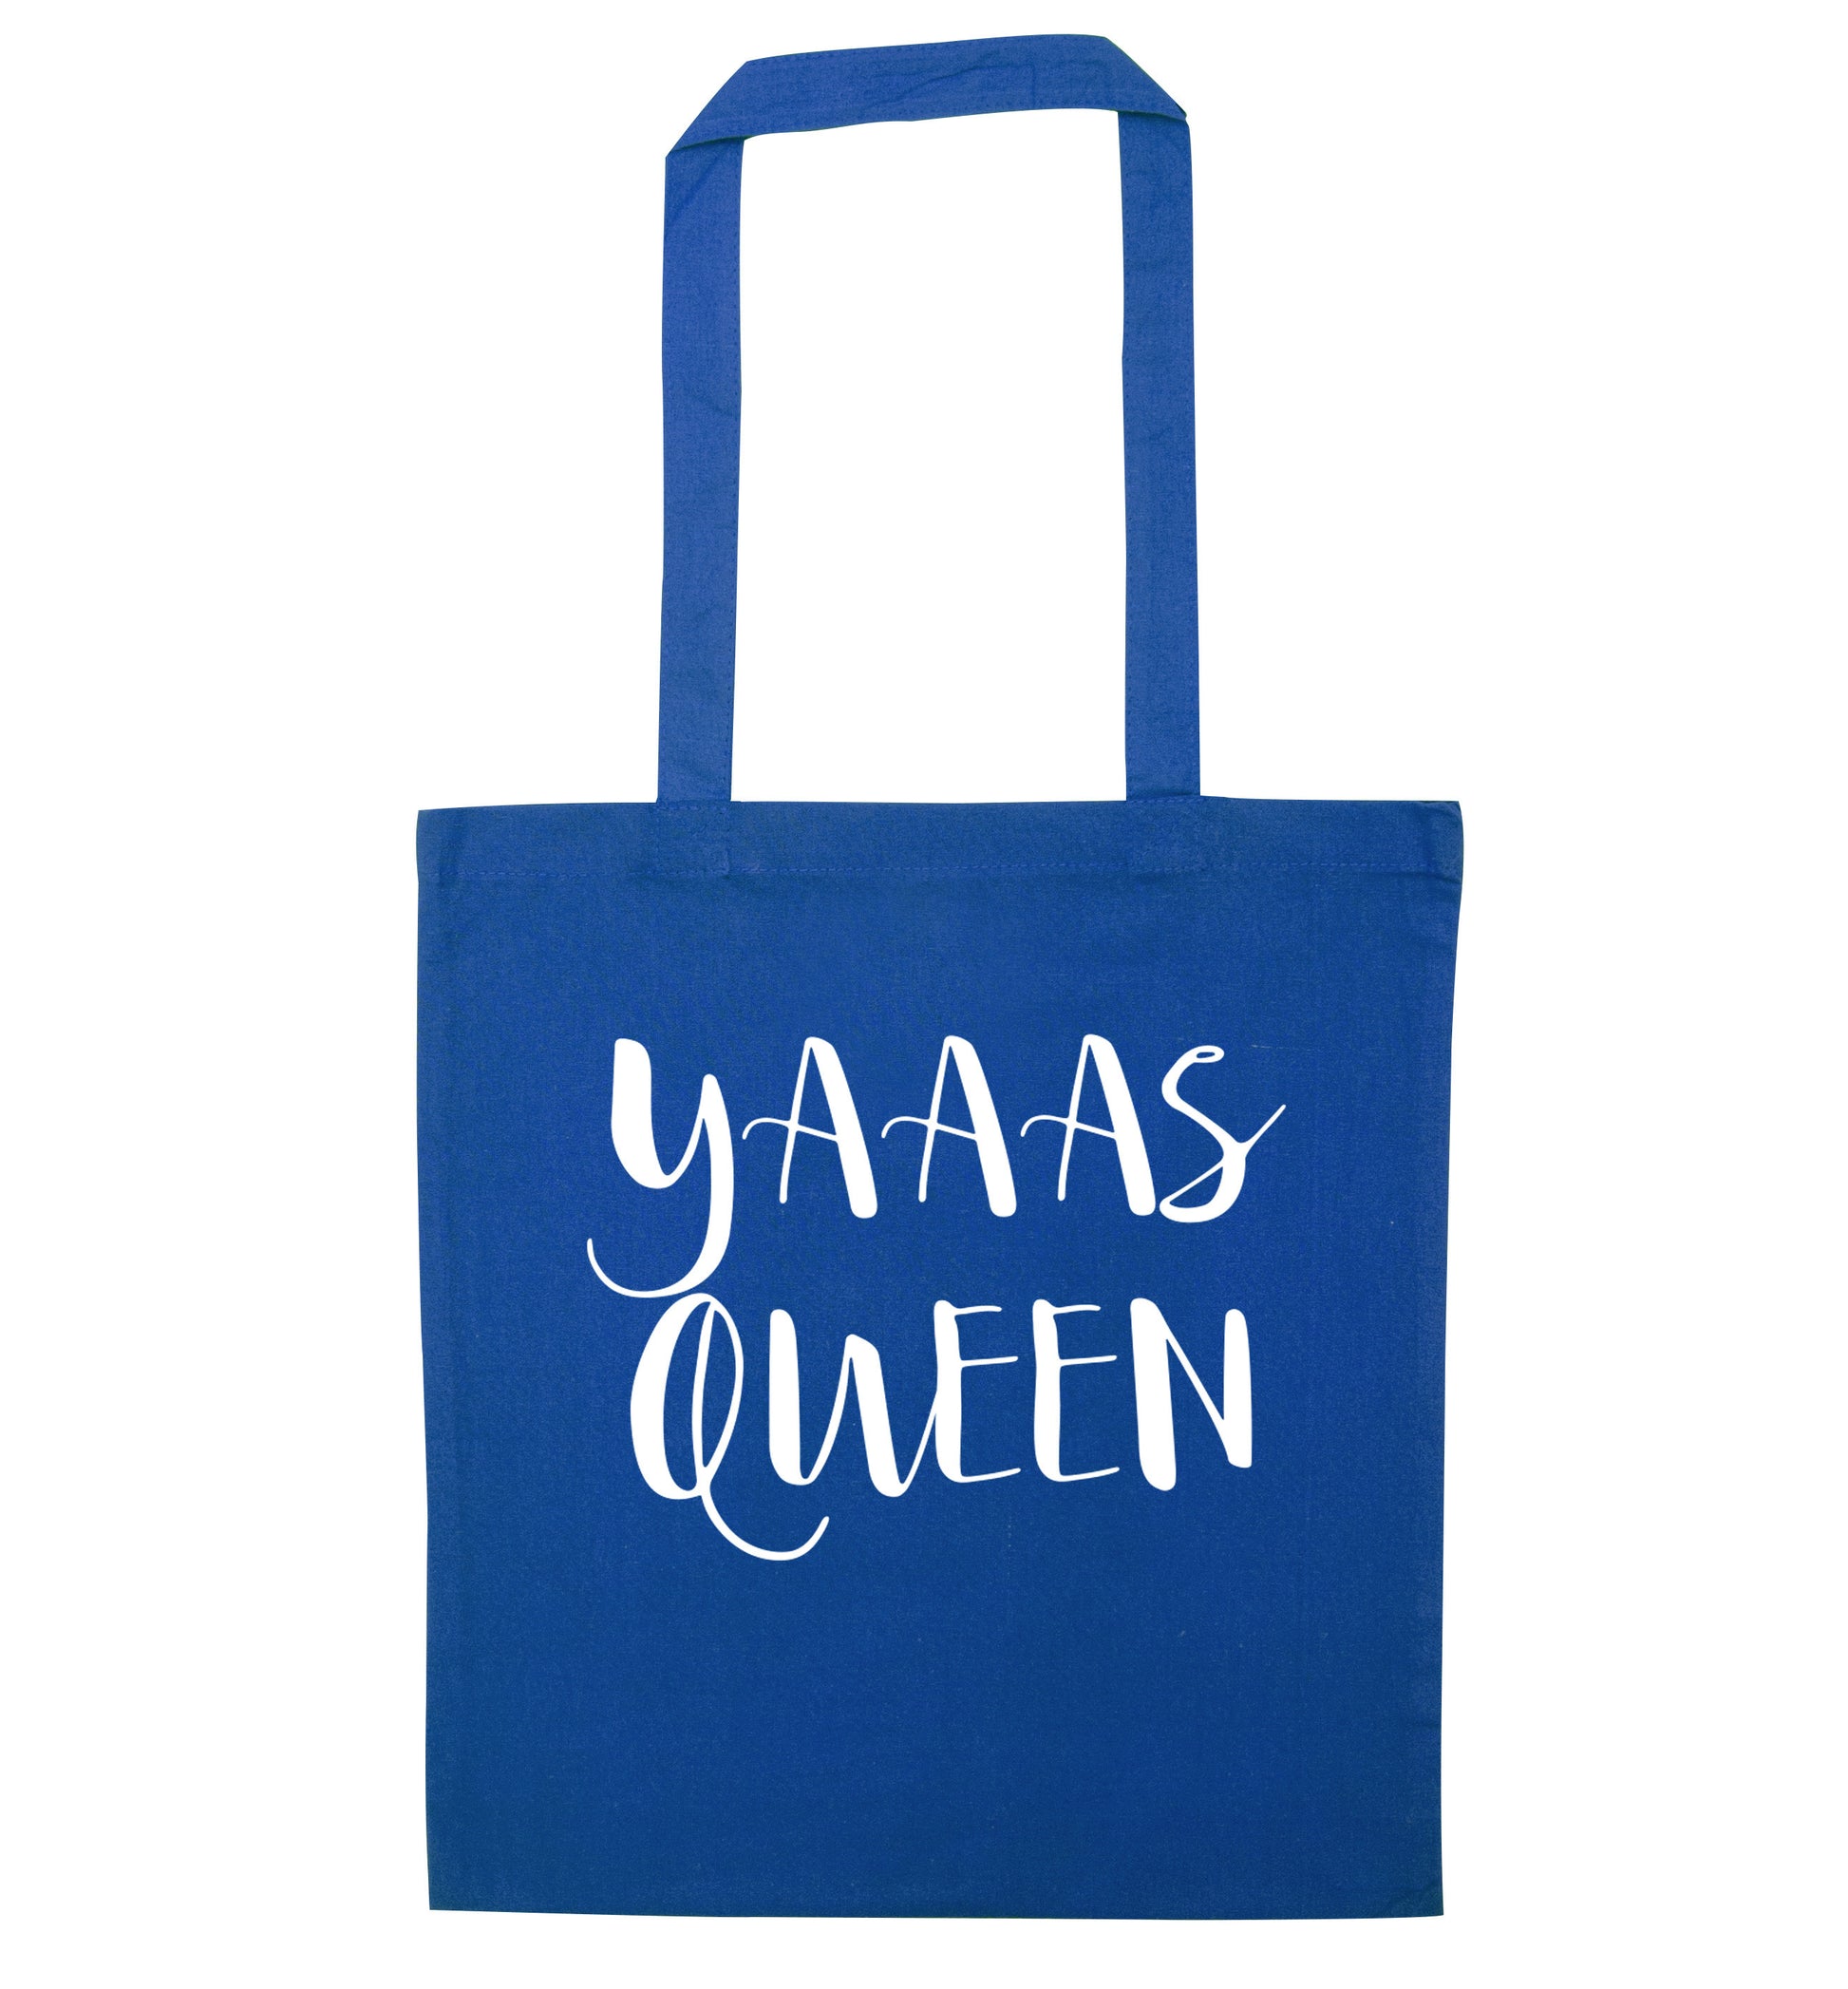 Yas Queen blue tote bag